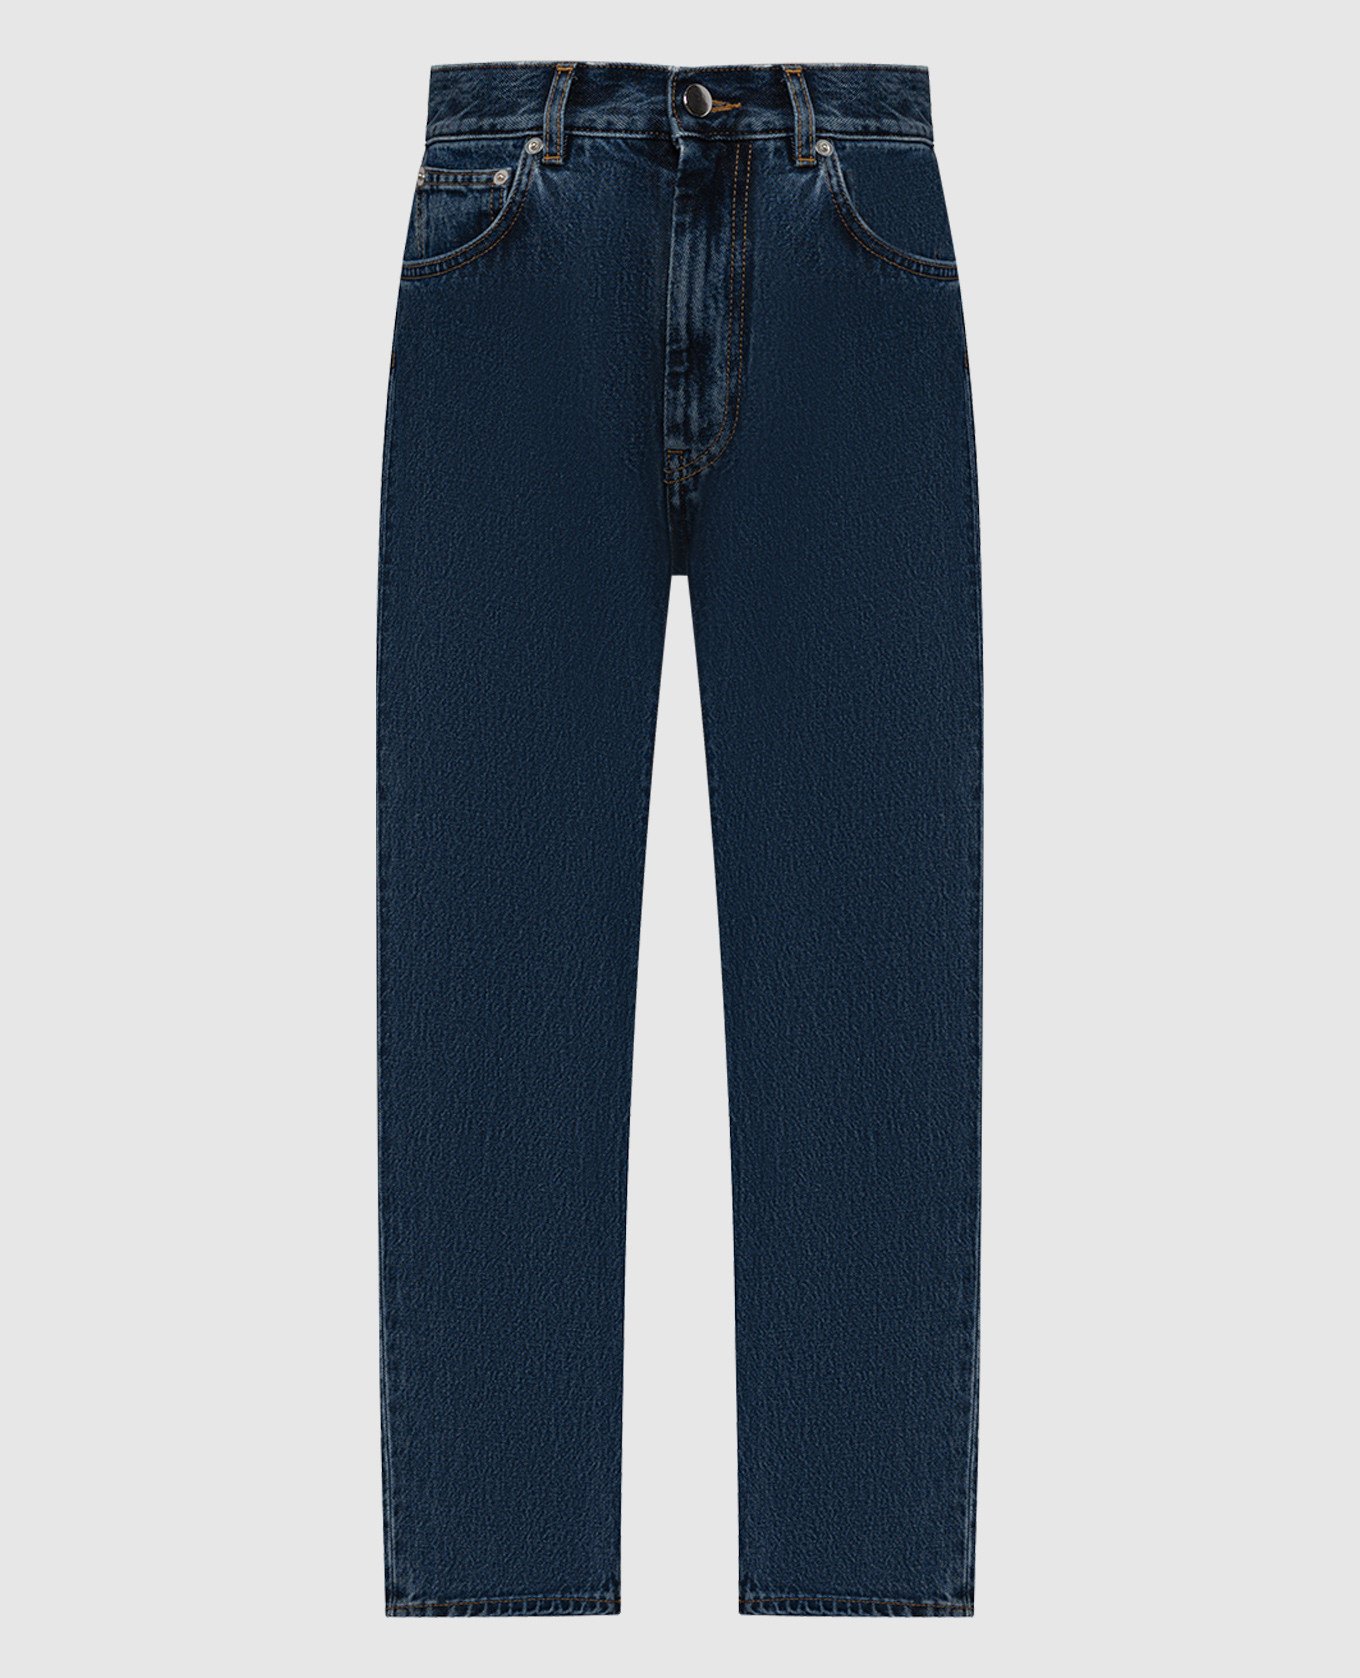 Wular blue jeans with logo patch